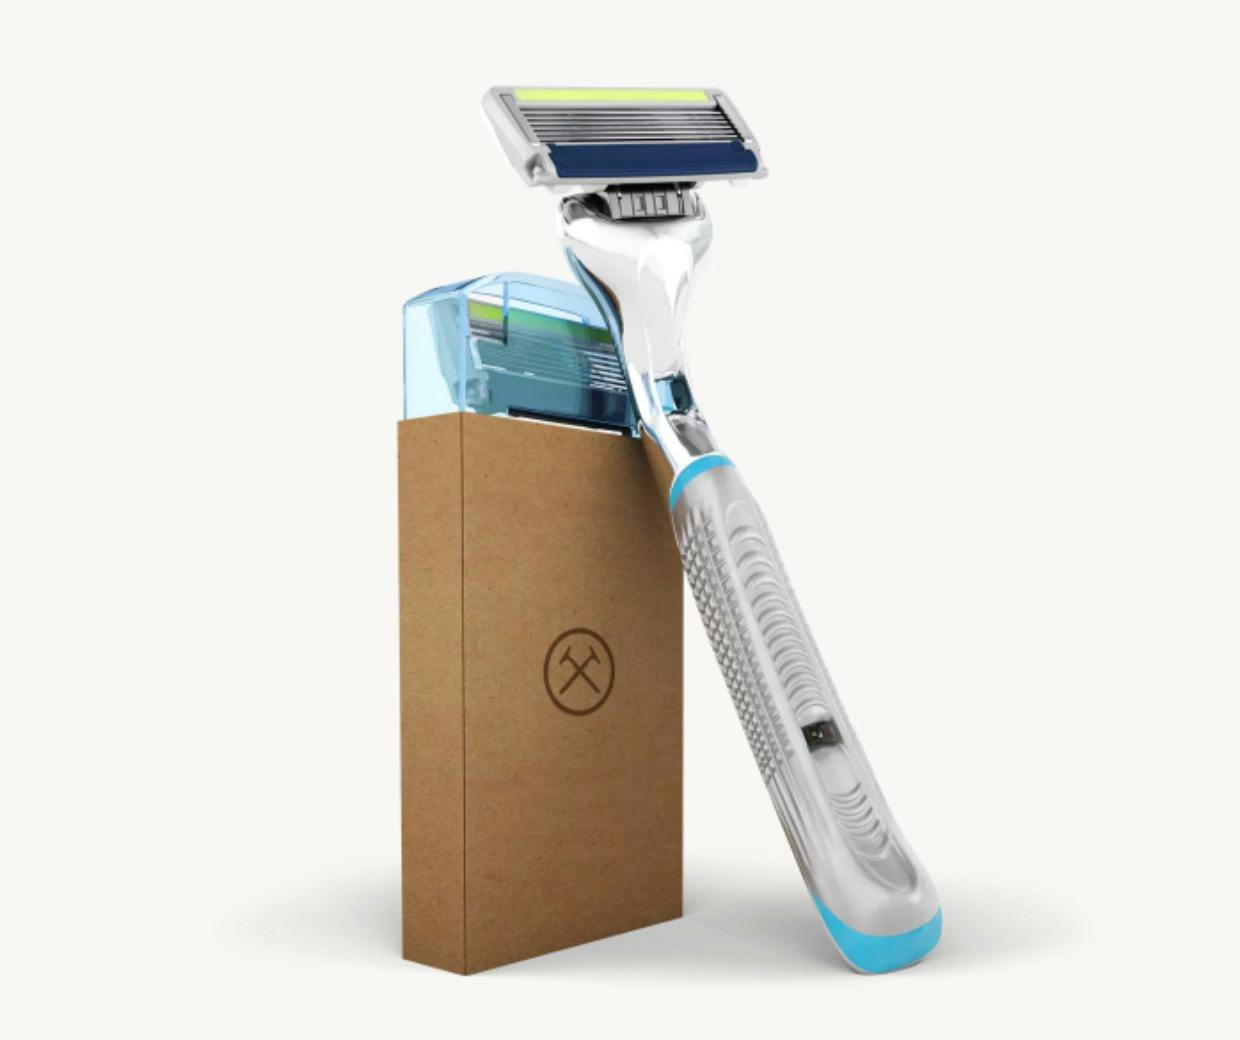 Dollar Shave Club shifts business model as subscription growth slows